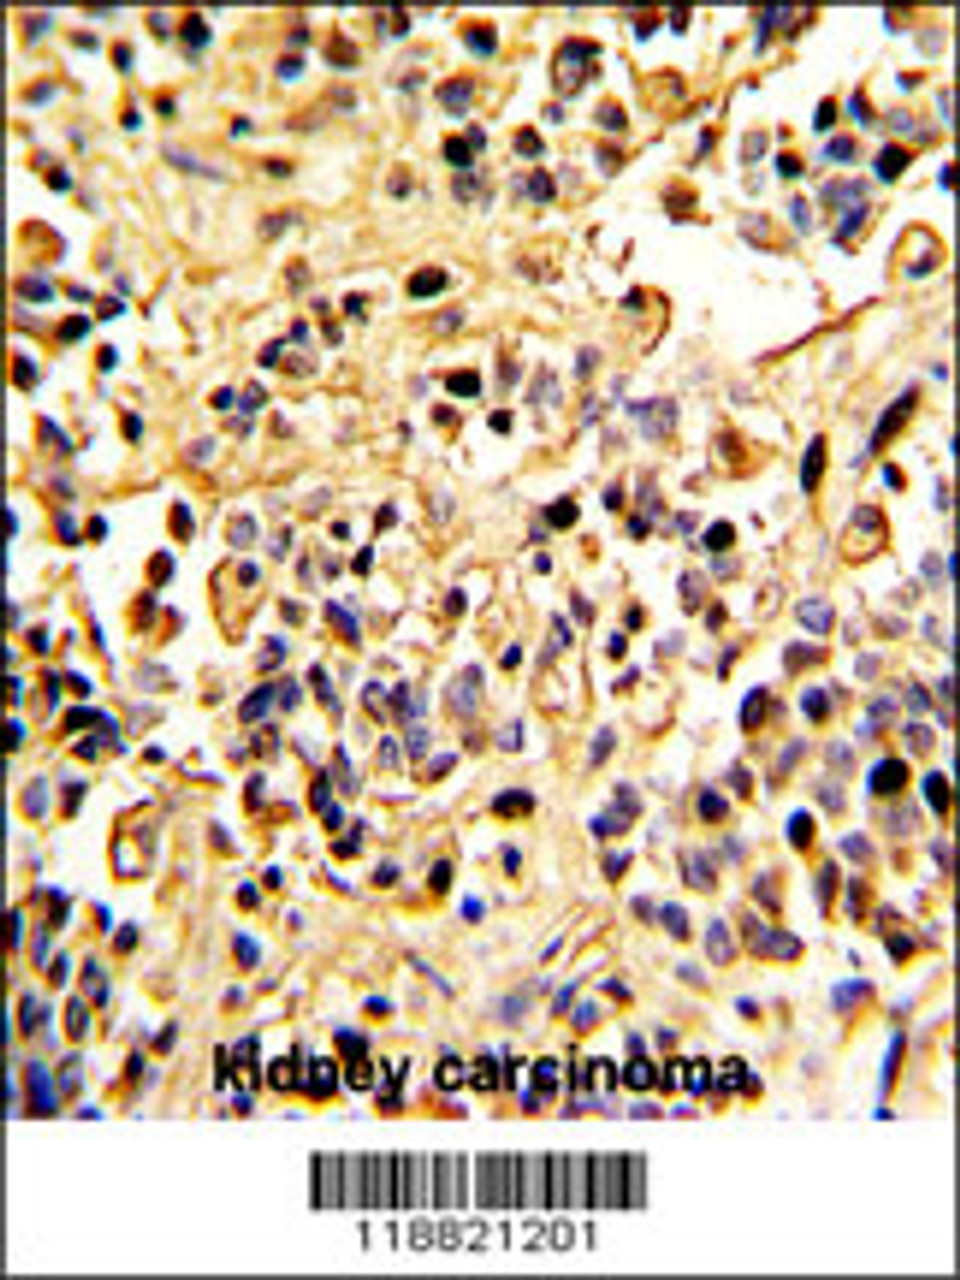 Formalin-fixed and paraffin-embedded human kidney carcinoma with Neprilysin Antibody, which was peroxidase-conjugated to the secondary antibody, followed by DAB staining.